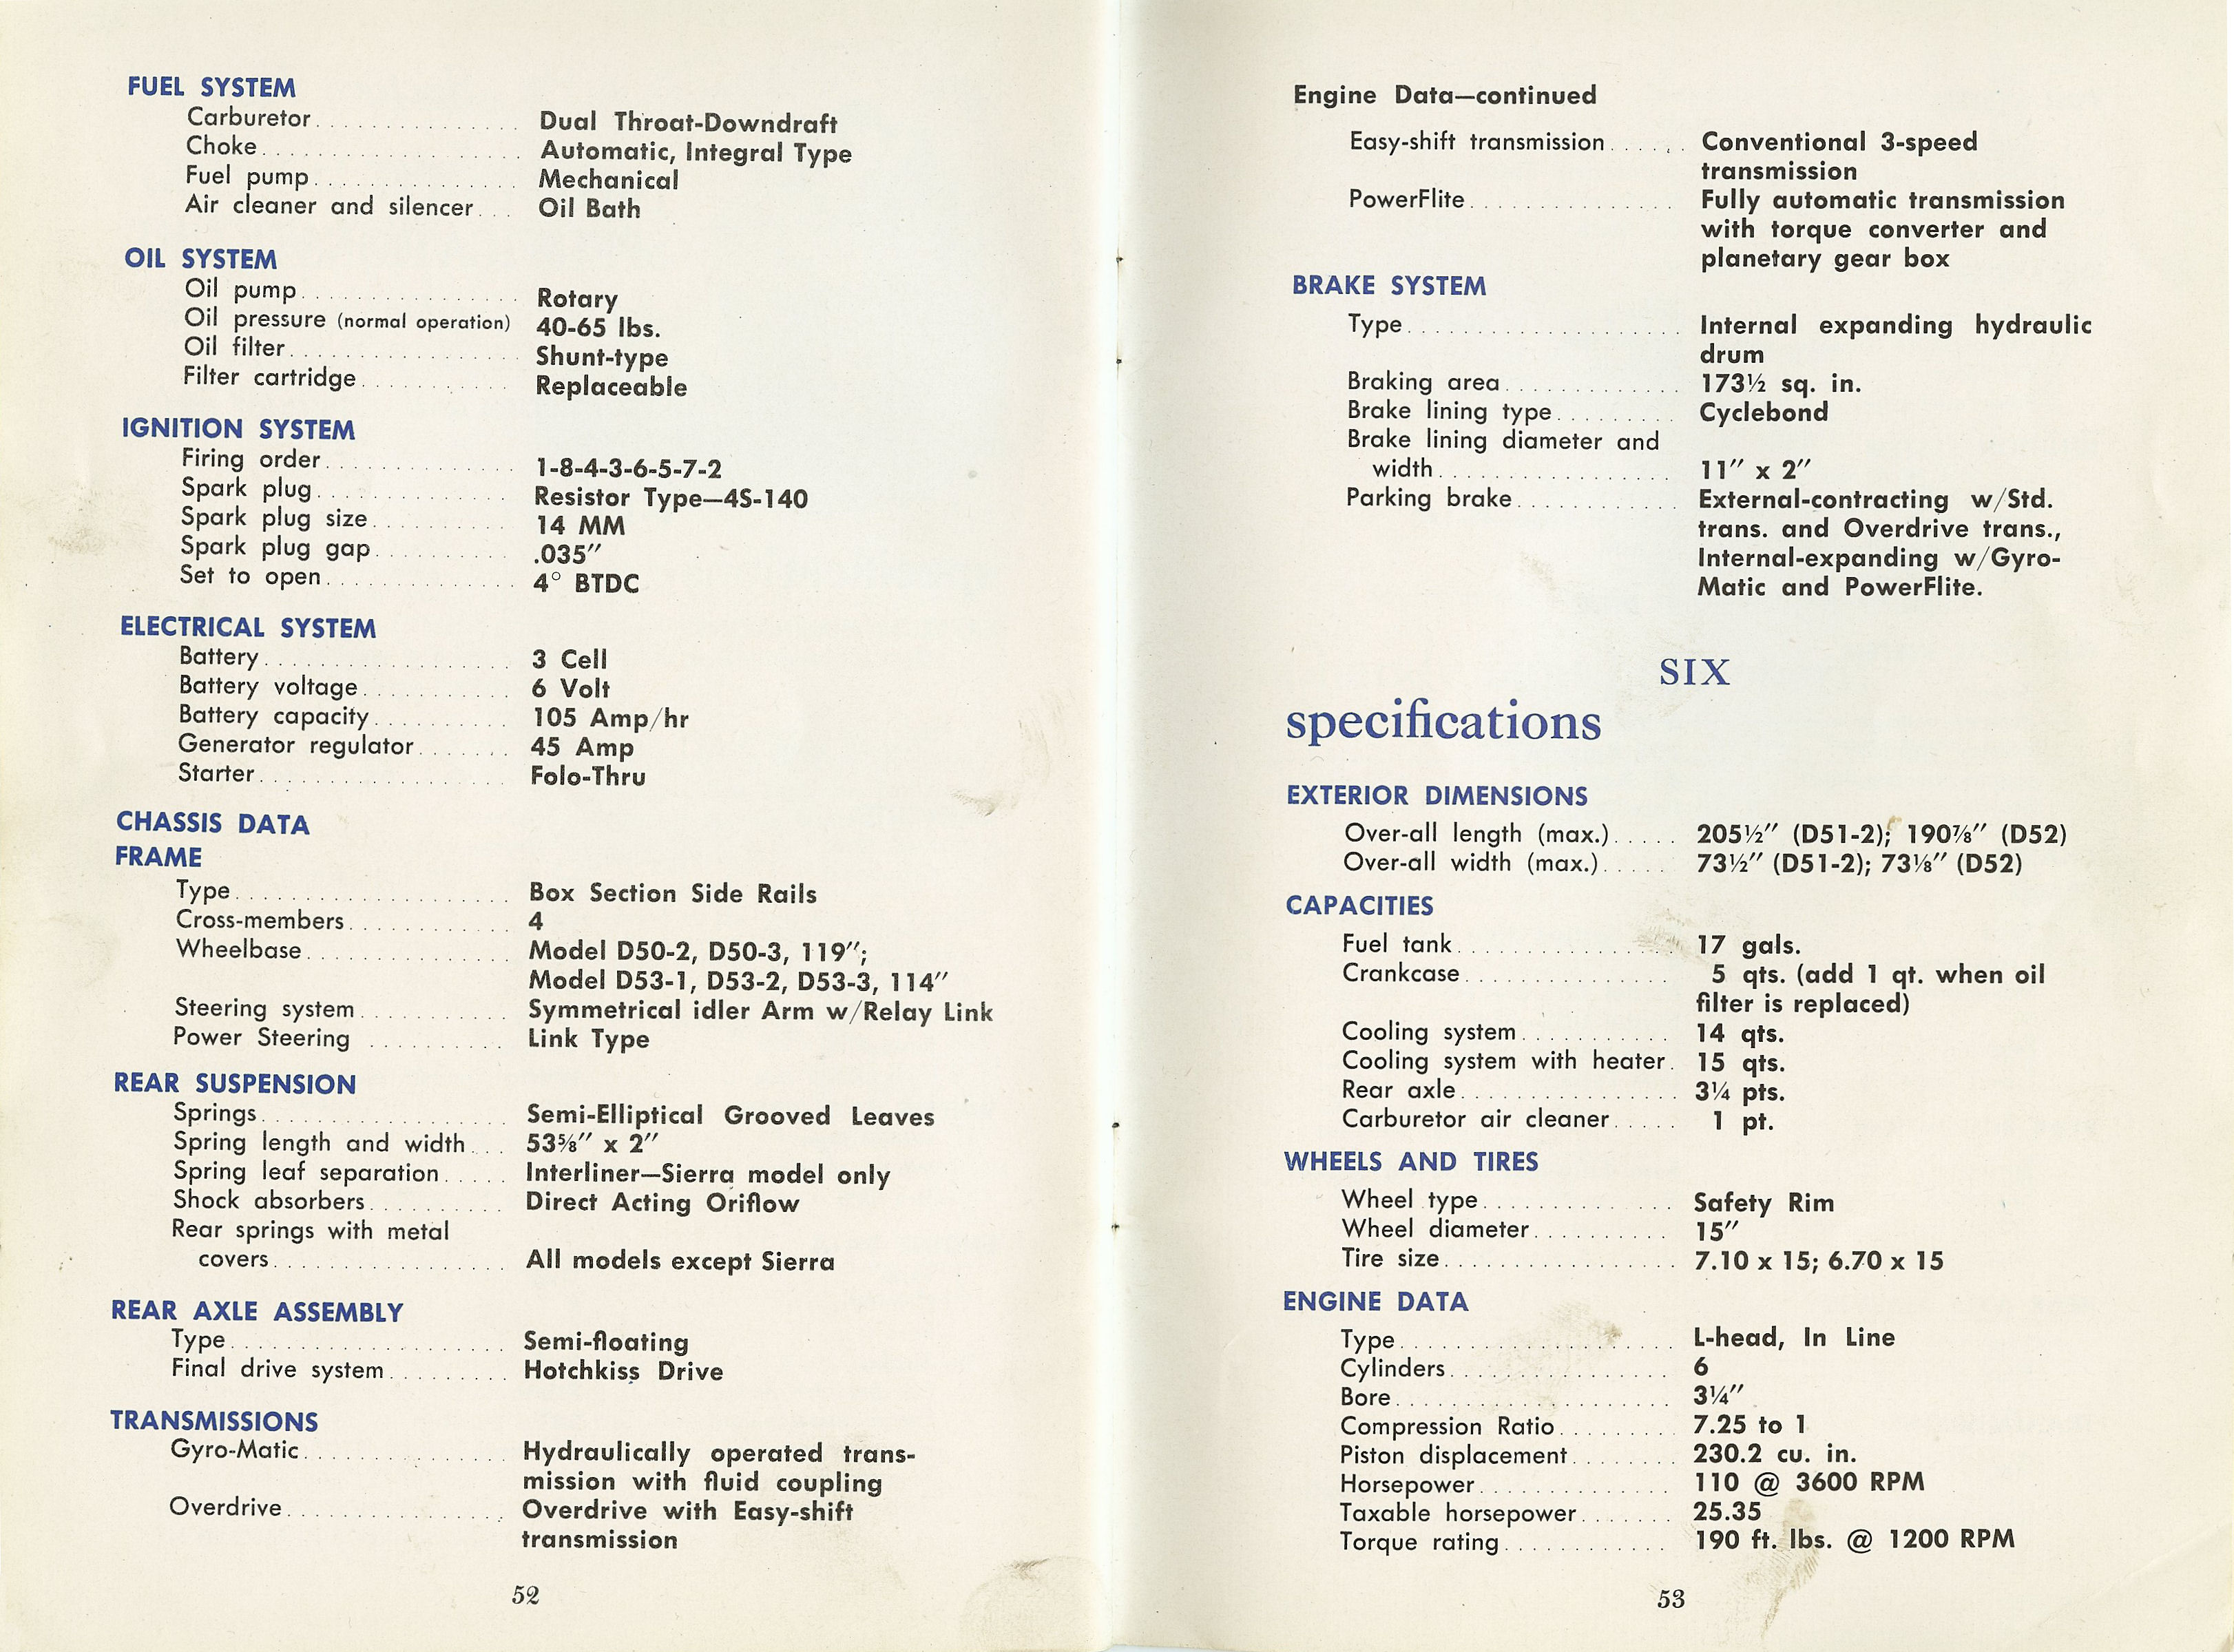 1954 Dodge Car Owners Manual Page 31